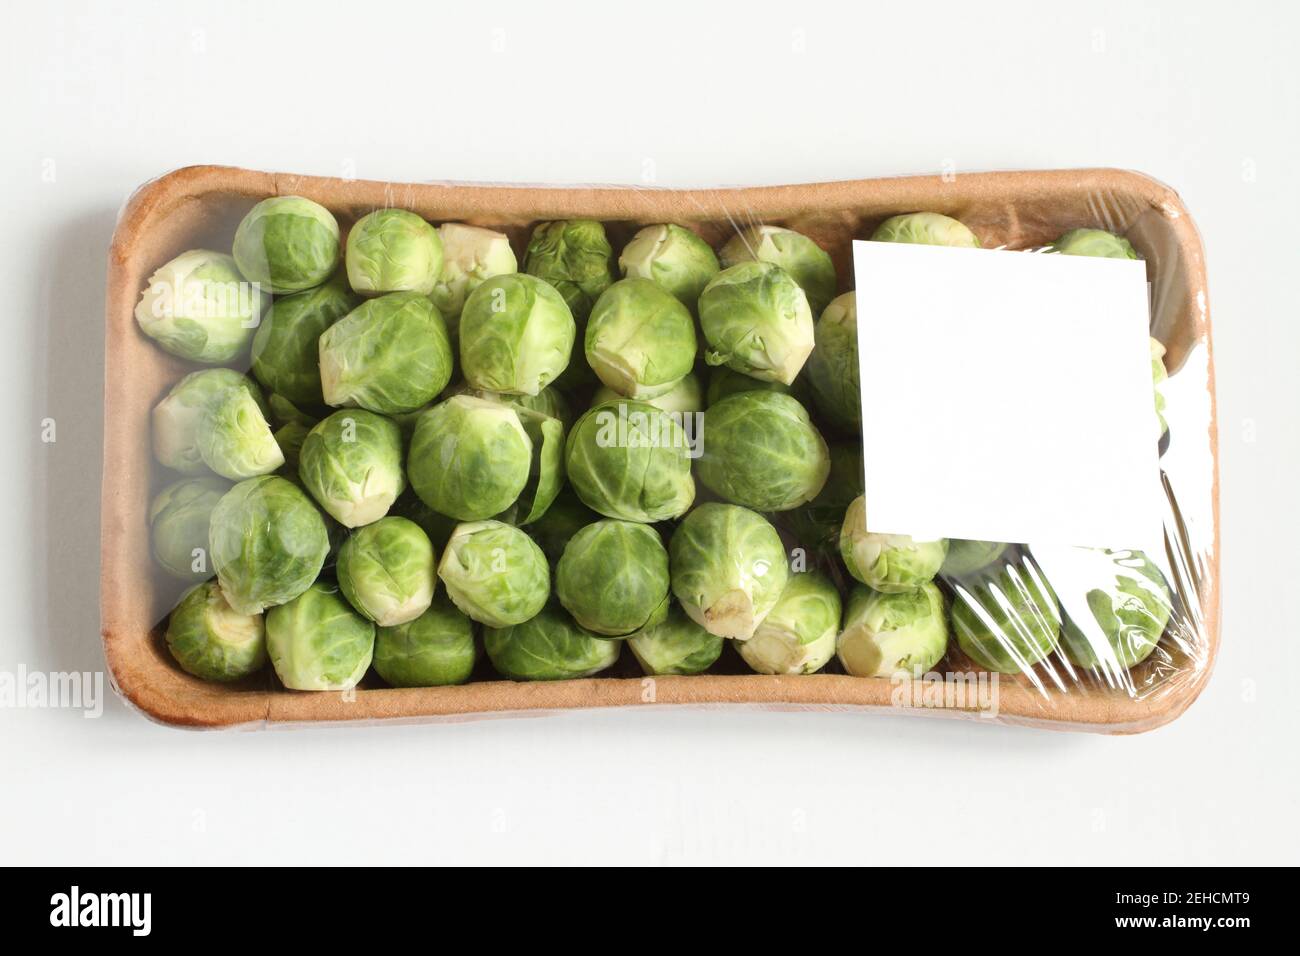 The heads of Brussels sprouts are randomly placed in a cardboard box and covered with transparent foil. The box is on a white table. Closeup. View fro Stock Photo